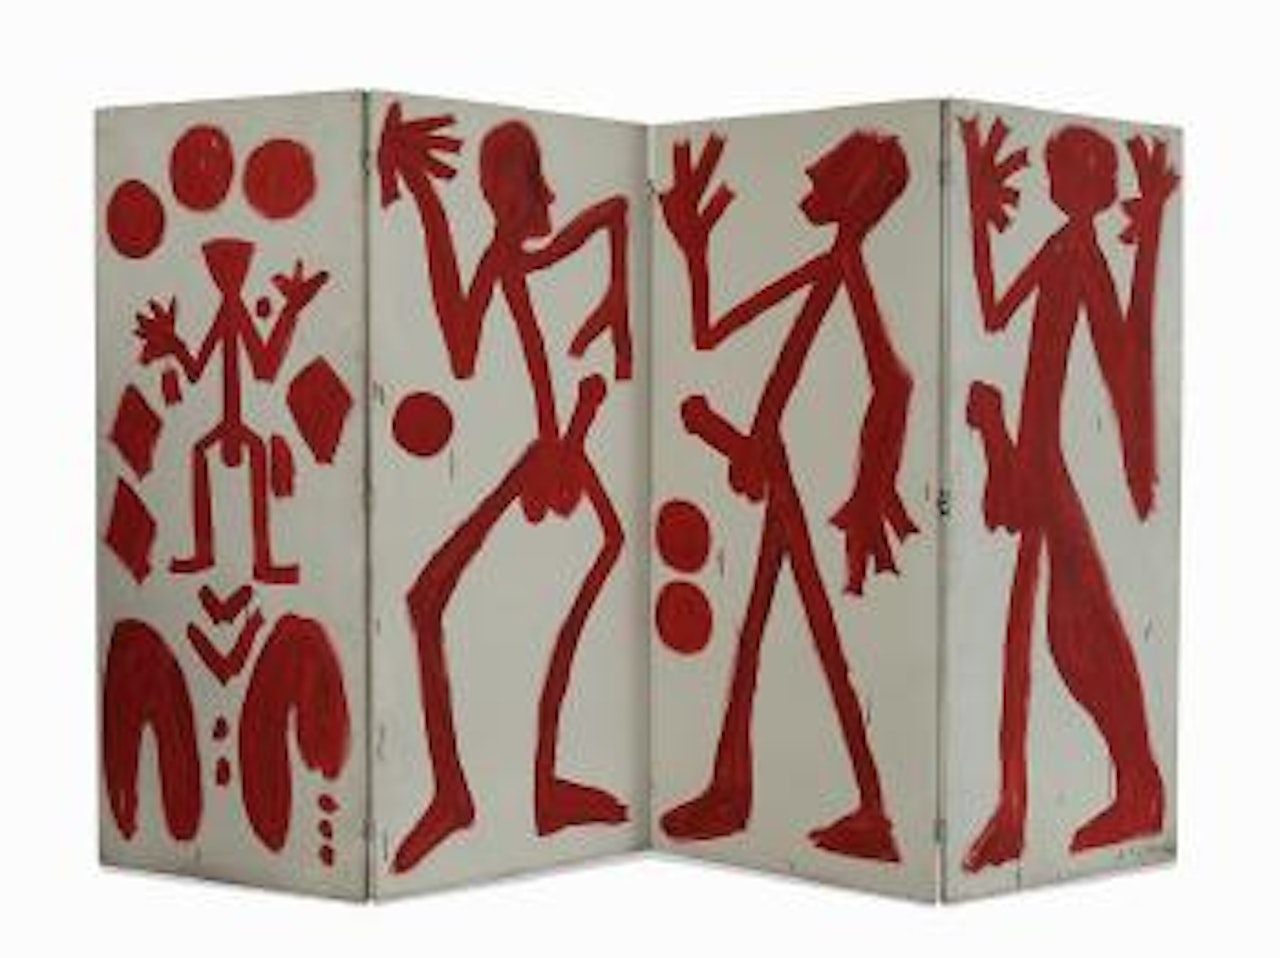 Untitled (Screen) by A.R. Penck